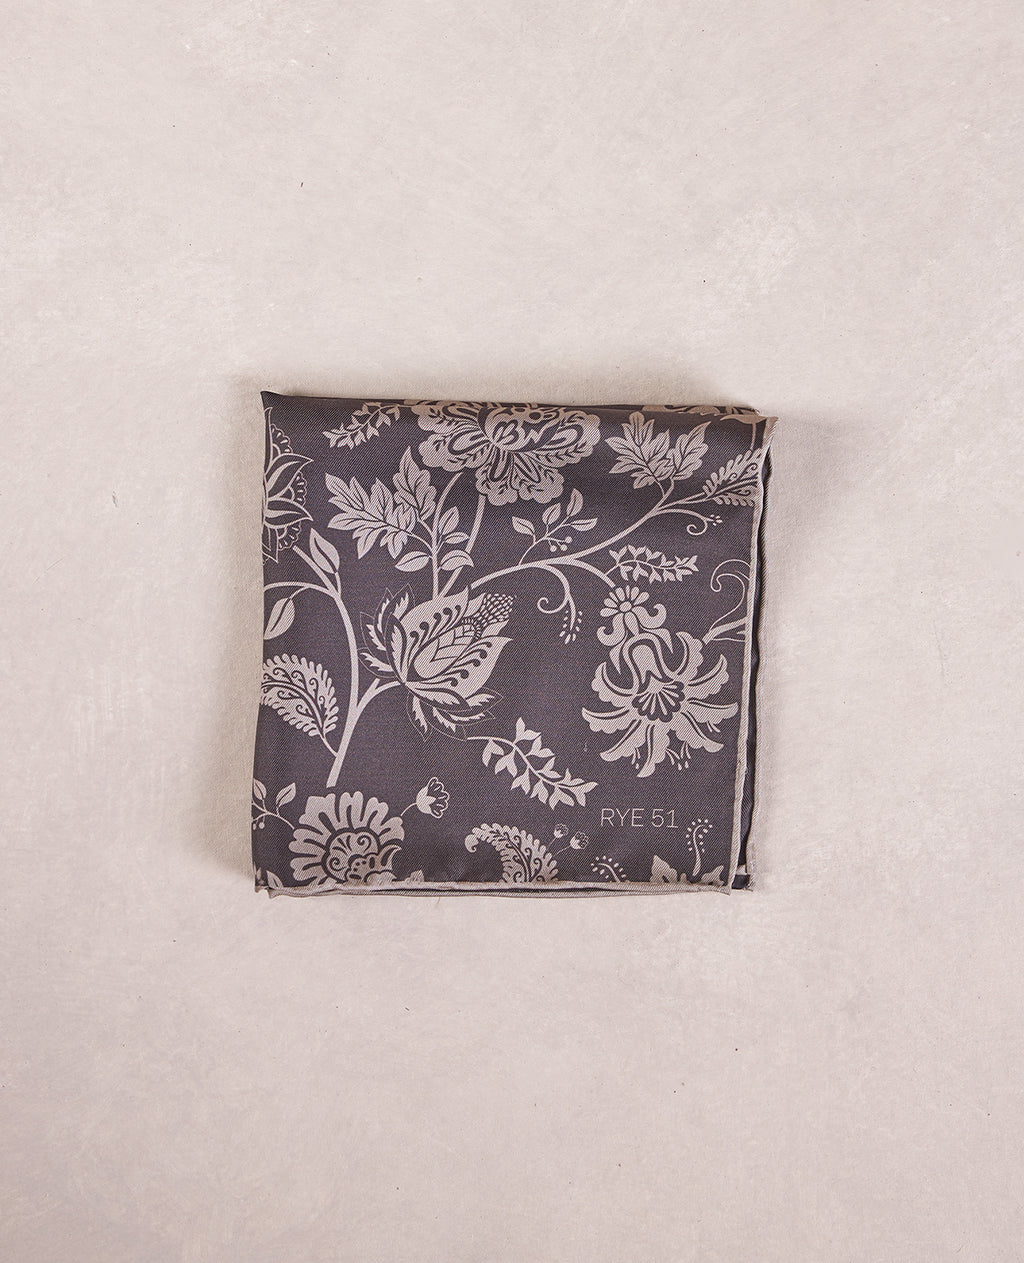 The Silk Pocket Square - Double Face - 100% Silk Pocket Square - Chocolate Solid / Floral